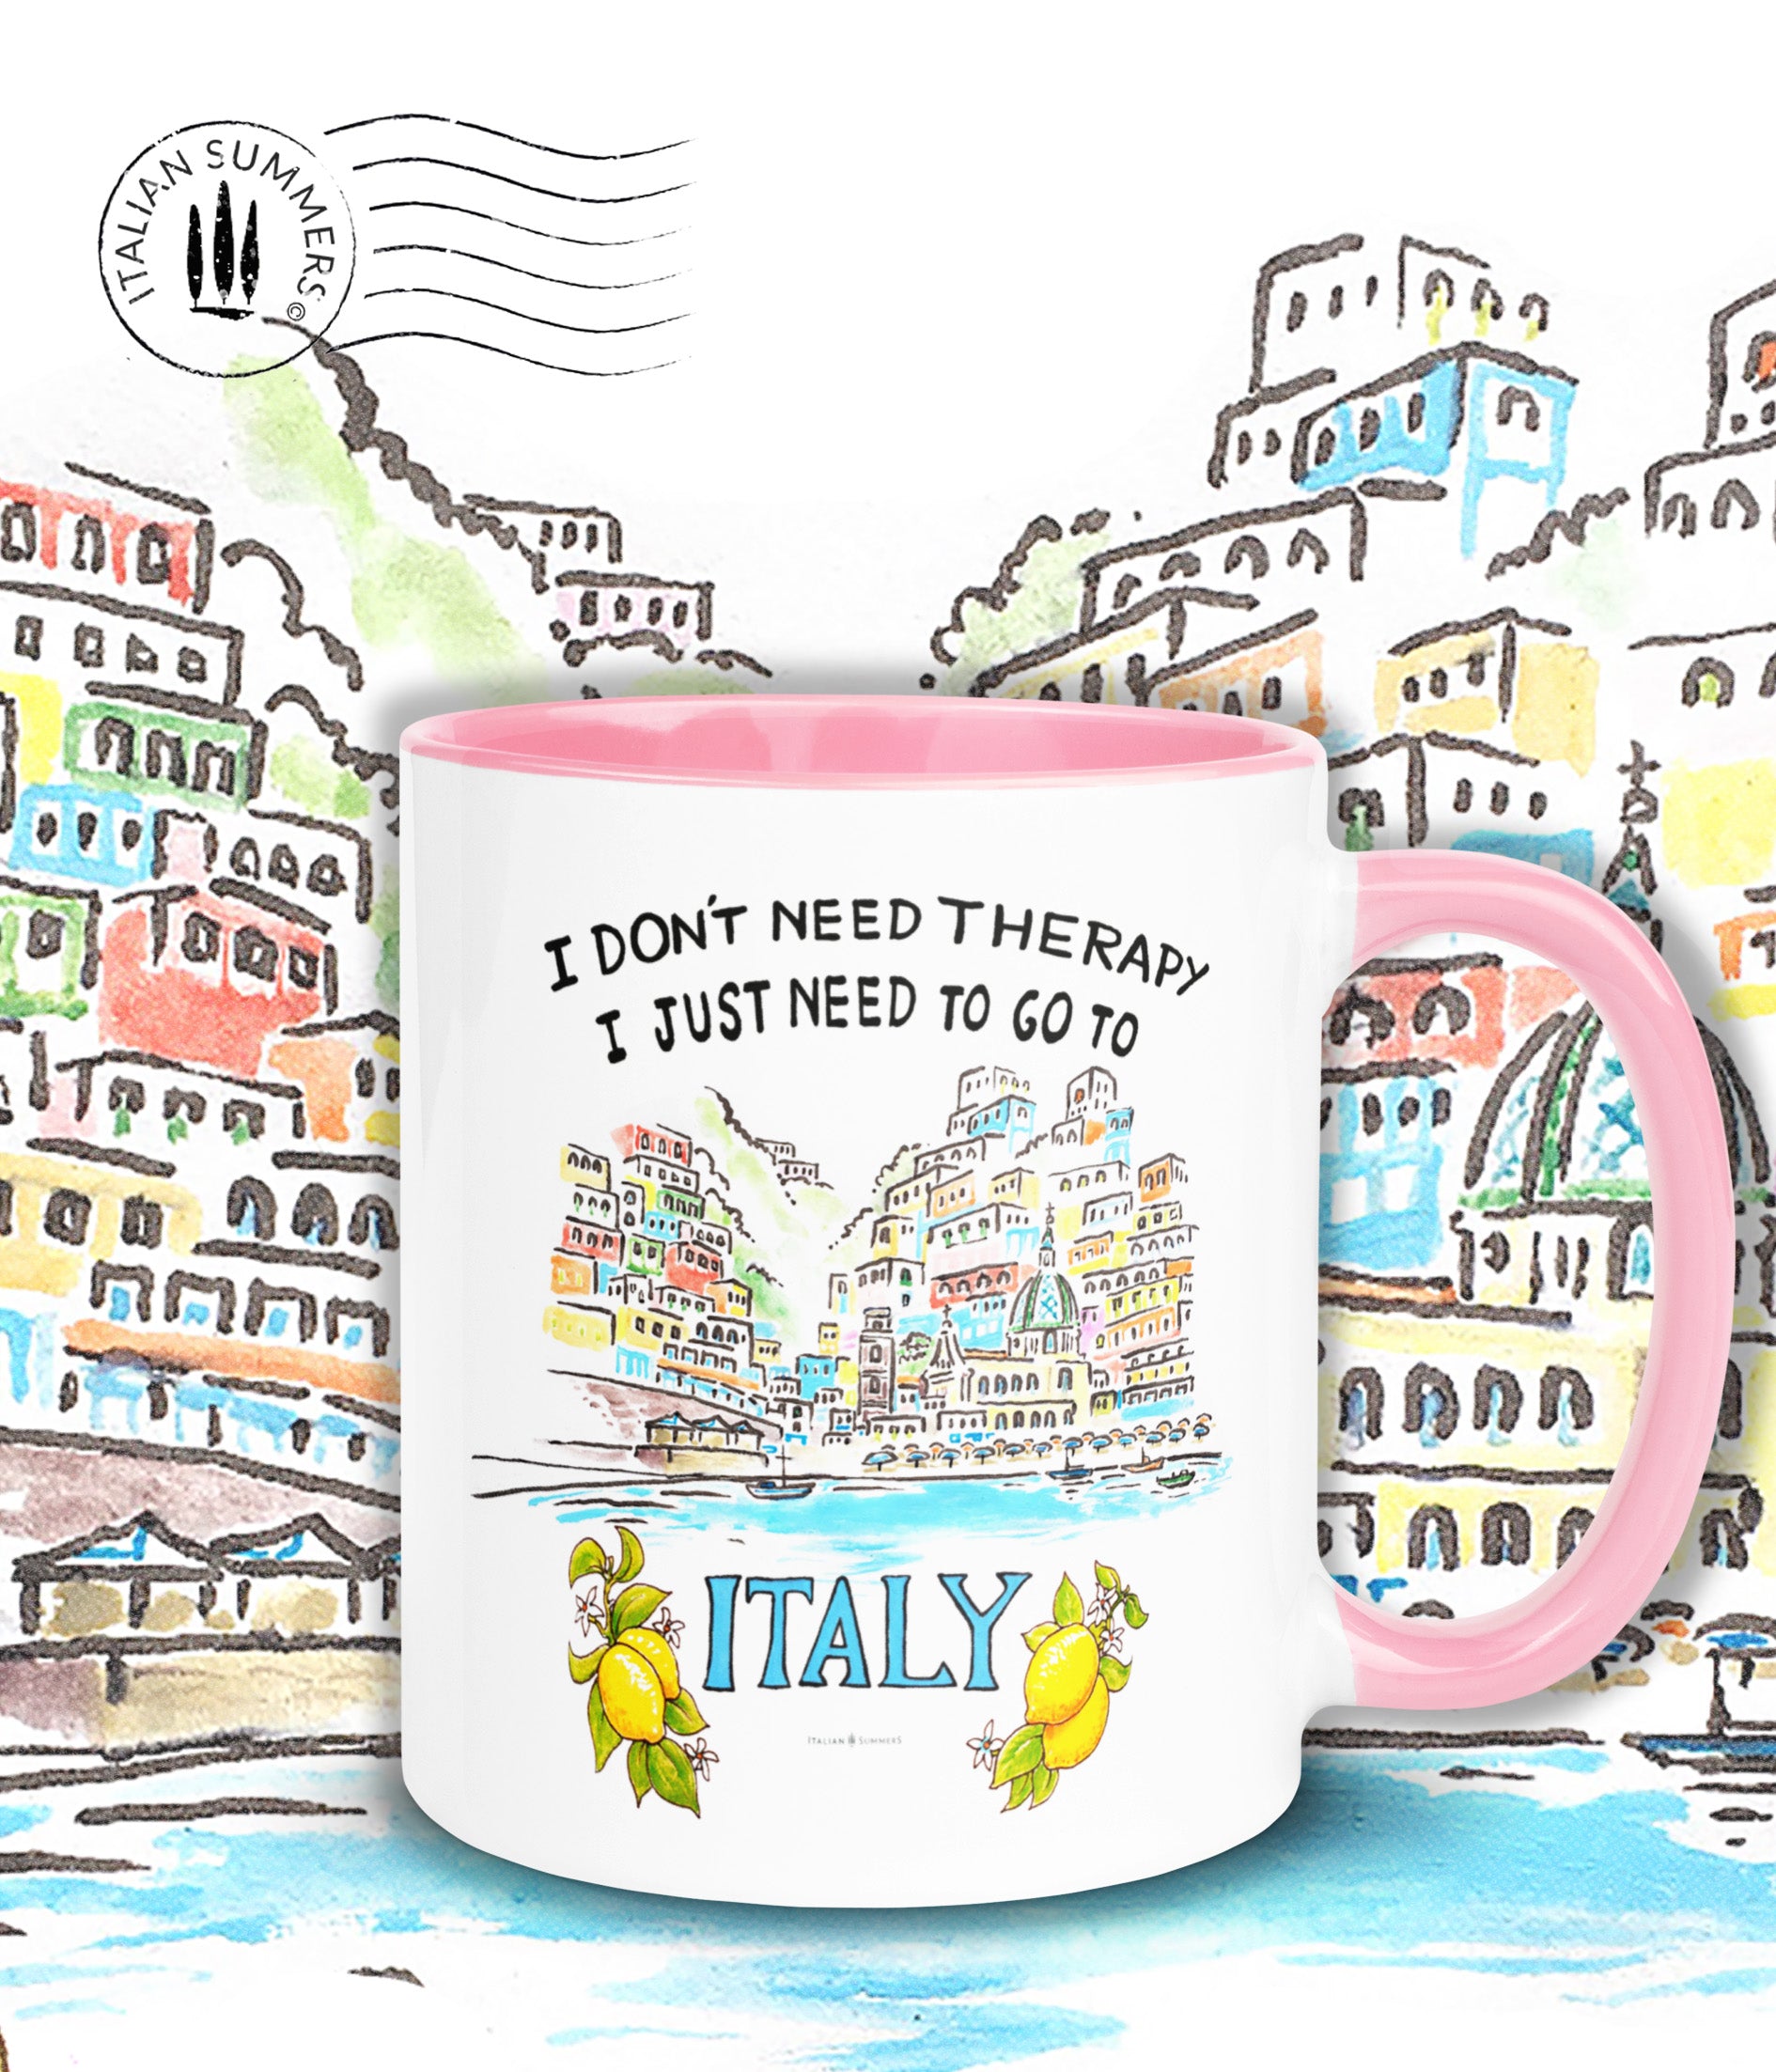 Italy mug inspired by the beauty of Italy's riviera's. The mug has the quote I don't need therapy, I just need to go to italy"The quote is accompagnied wit a sketch of Positano seen from the Mediterranean sea. The sketch is a water clolor sketch filled with ice cream colored houses and a part of the beach with beach umbrellas. Printed on 2 sides. The inside/handle of the mug is available in pink, blue, yellow and orange,...just like ice cream. :-) Made by Italian Summers